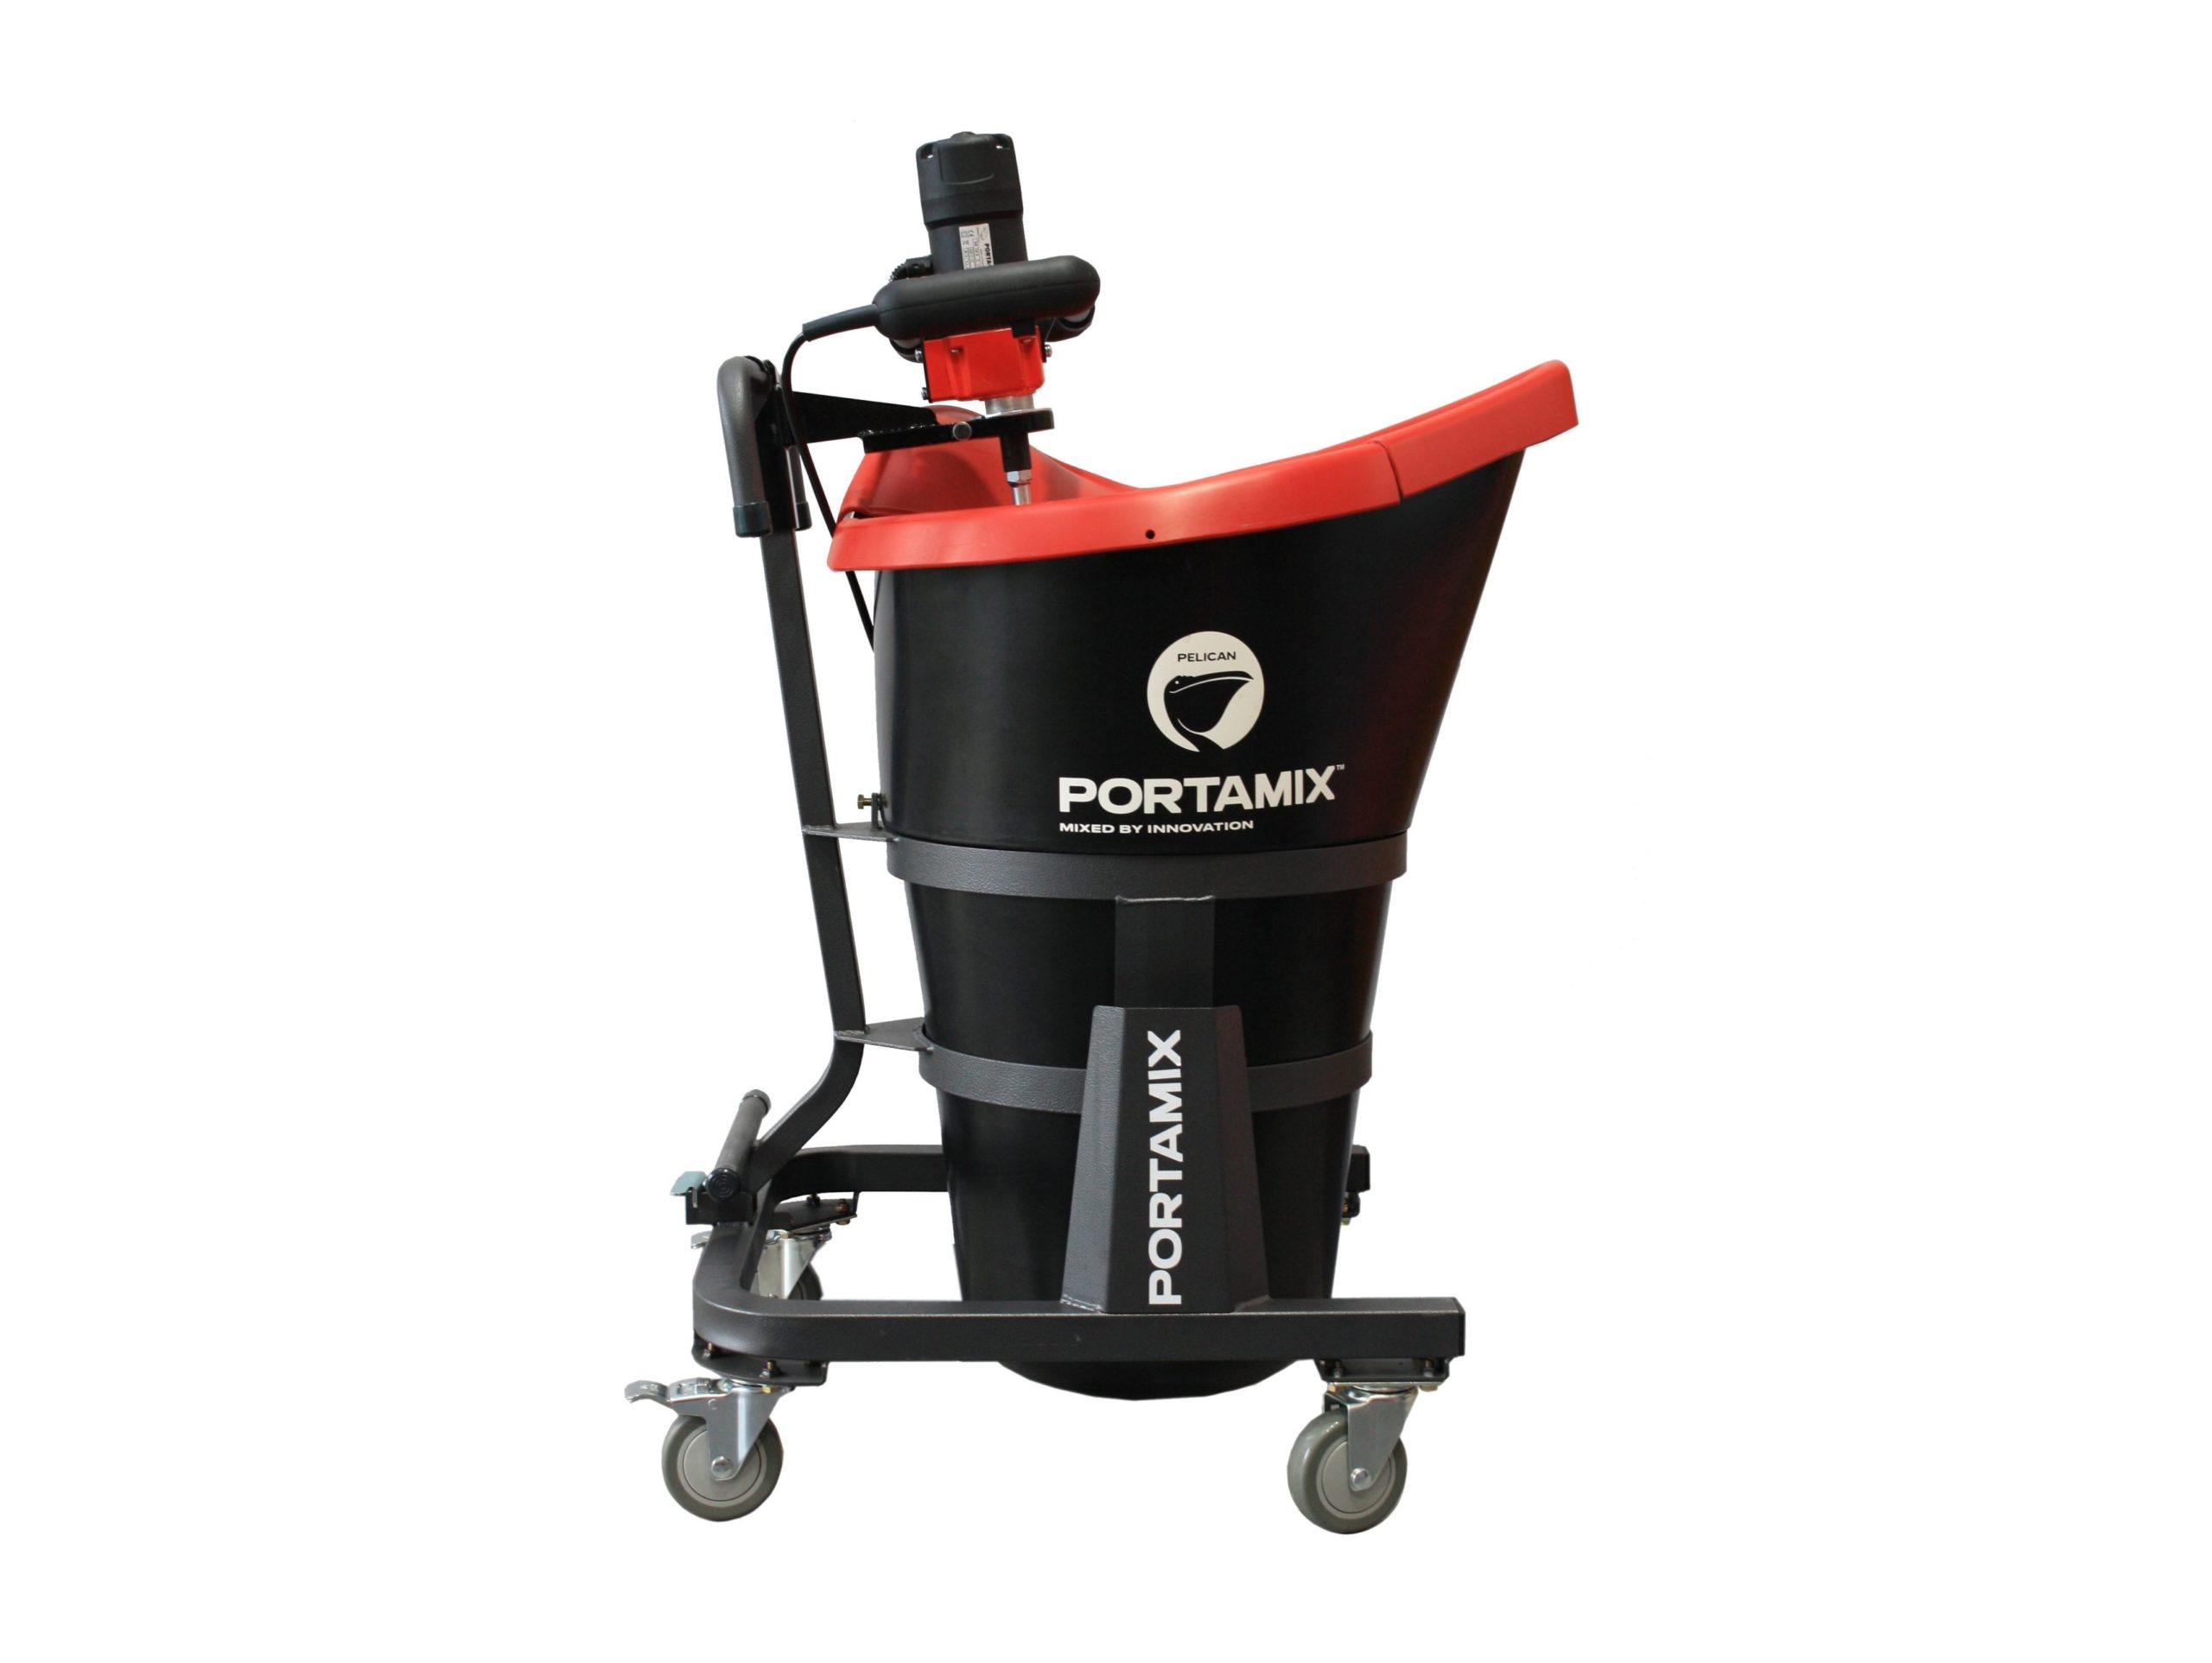 The image showcases a Portamix Pelican and dust control Kit set against a pristine white background. The cart is predominantly black and red, featuring sturdy wheels for easy mobility. The "Portamix" brand name is prominently displayed on the cart. Additionally, the cart is equipped with a Dust Control Kit, which includes a lid, motor mount, and a vacuum hose cuff. An illustration of what the product would look like with a Portamix Hand Mixer mounted is also visible. Various Portamix logos and branding elements, including a small Pelican logo depicted as a bird, are scattered throughout the image, emphasizing the brand's identity.